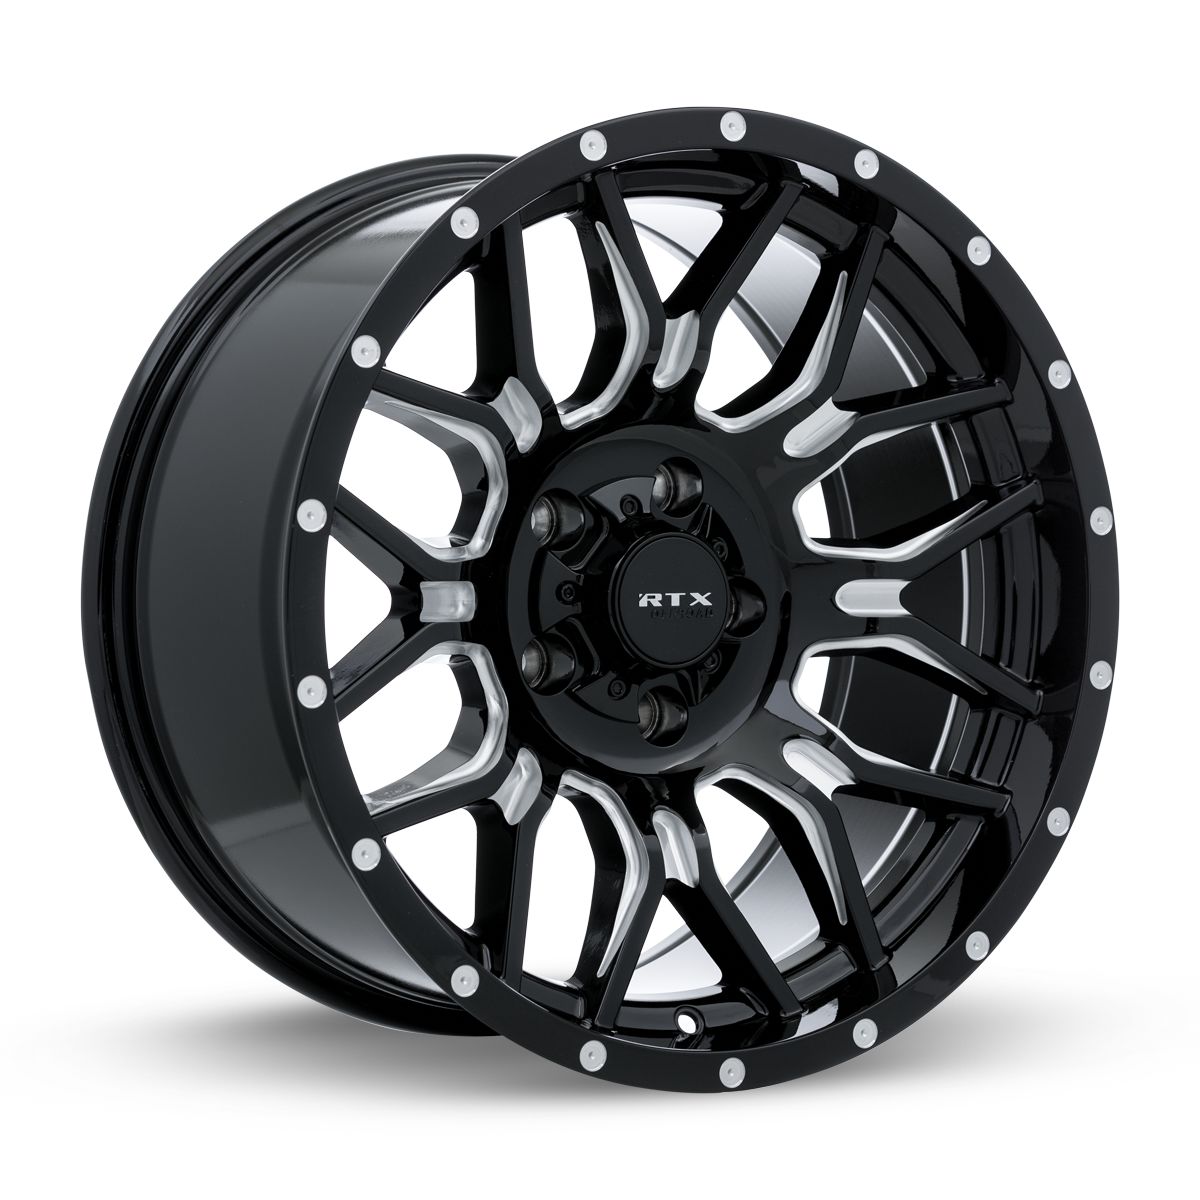 RTX® (Offroad) • 163743 • Claw • Gloss Black Milled with Rivets • 20x10 6x139.7 ET-18 CB106.1